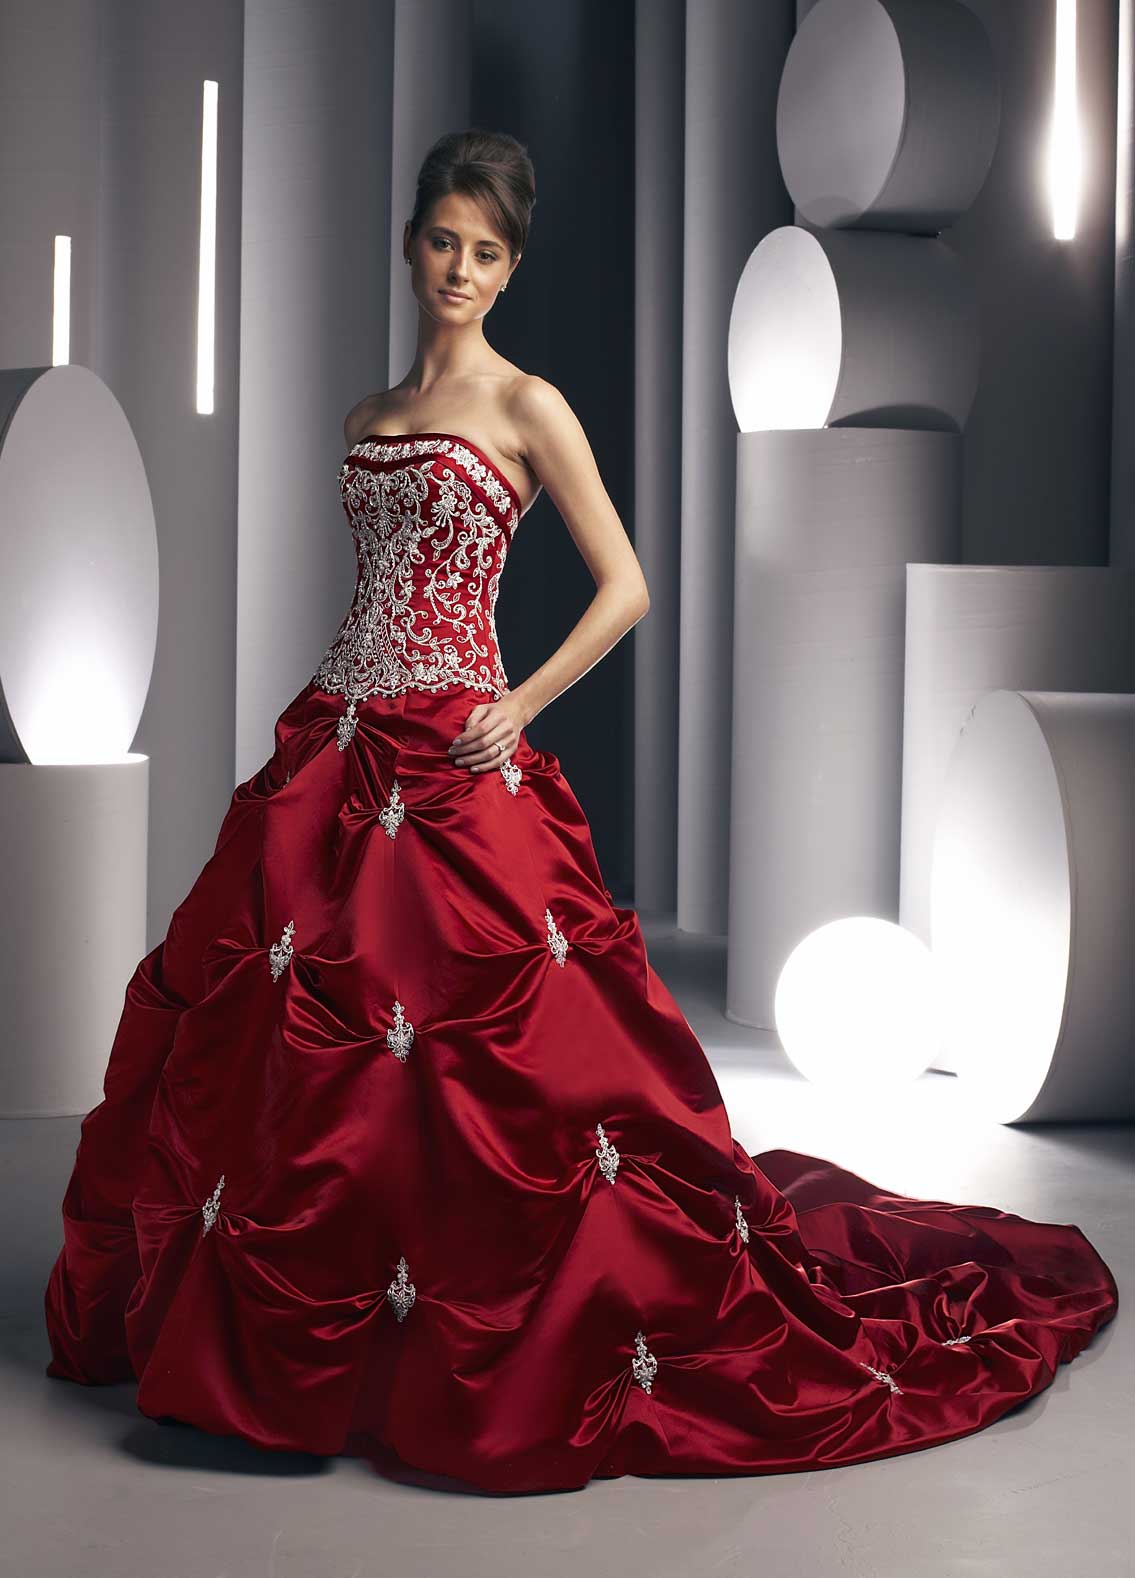 Great Wedding Dress With Red Trim of all time Learn more here 